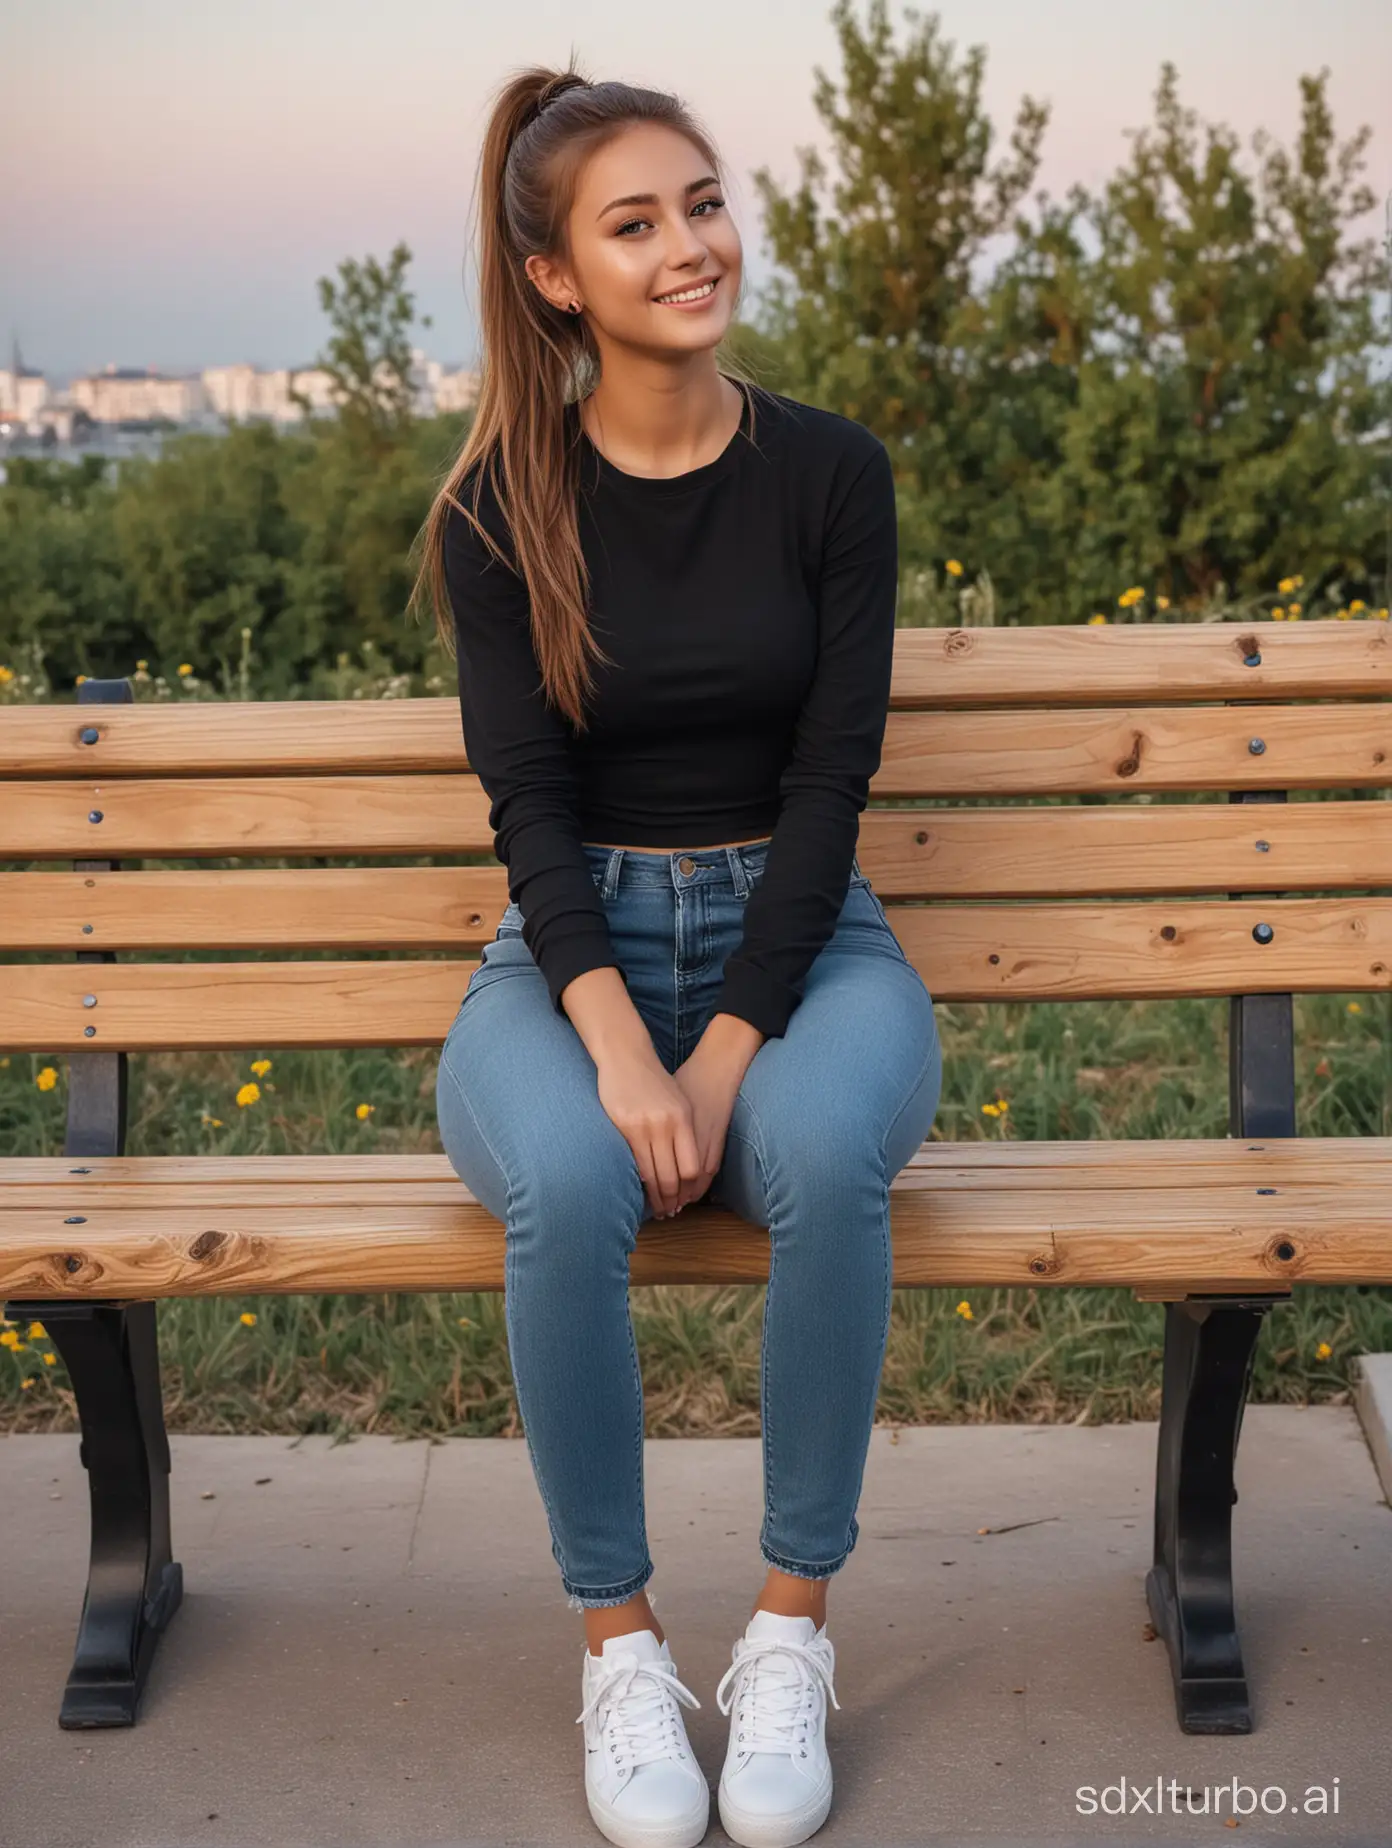 Confident-Eastern-European-Girl-Sitting-on-Bench-in-Dynamic-Pose